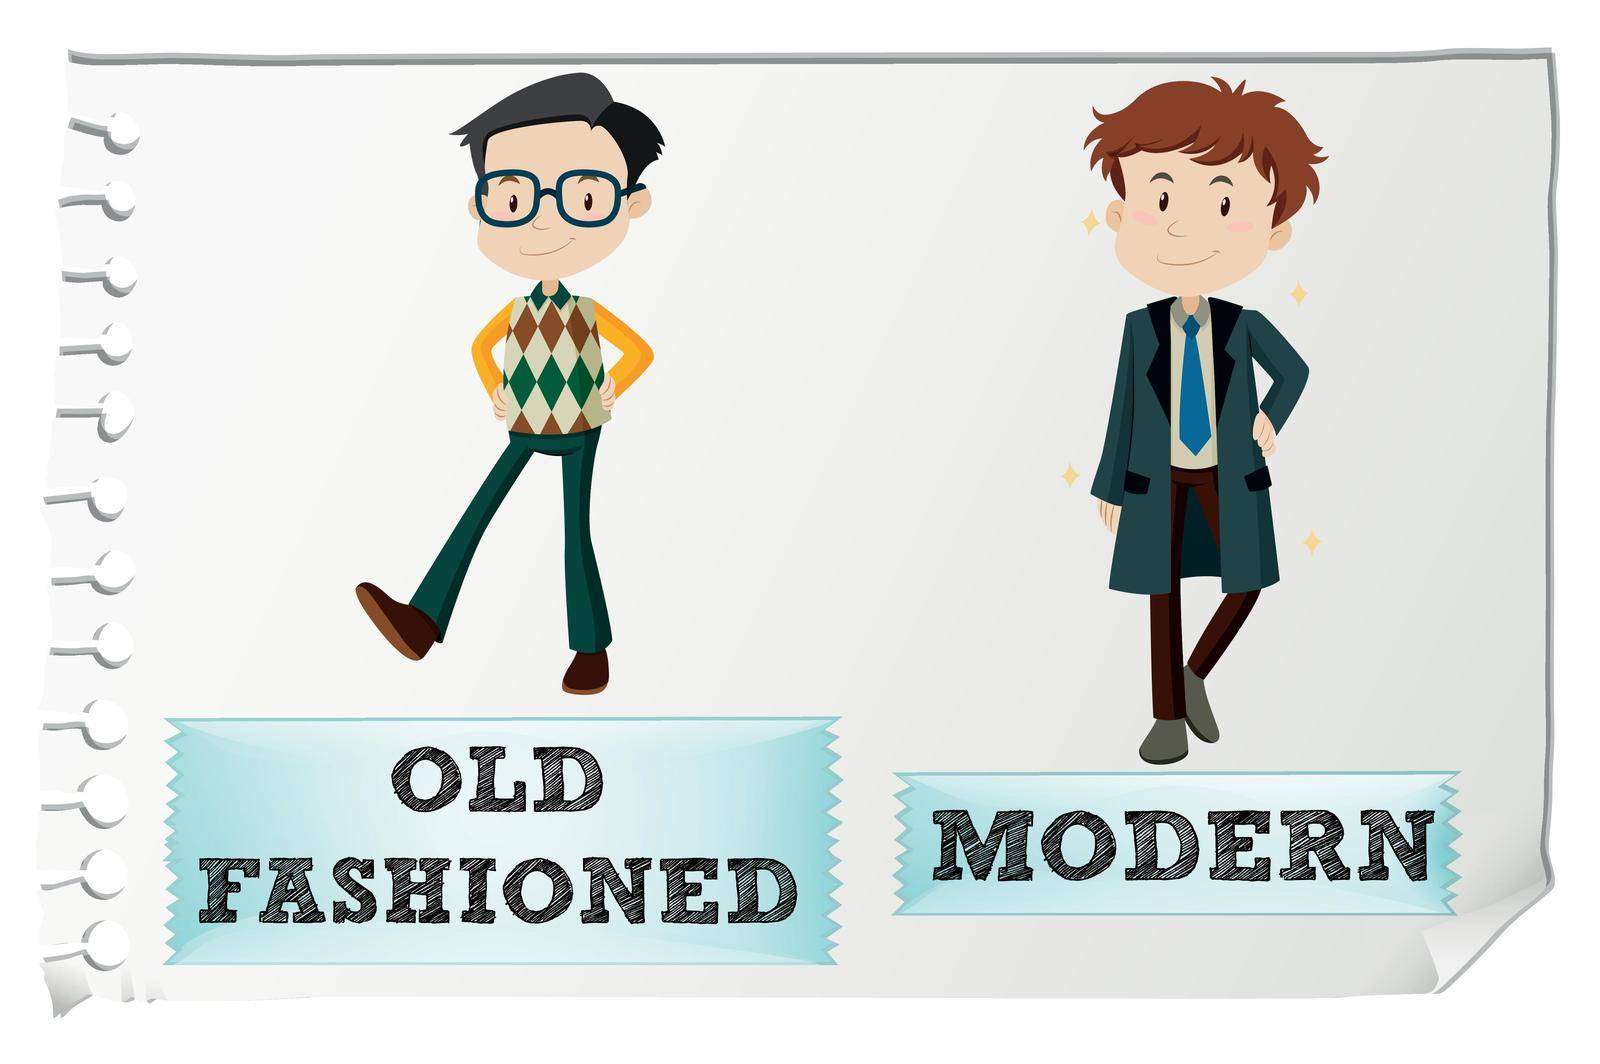 Opposite adjectives with old-fashioned and modern illustration